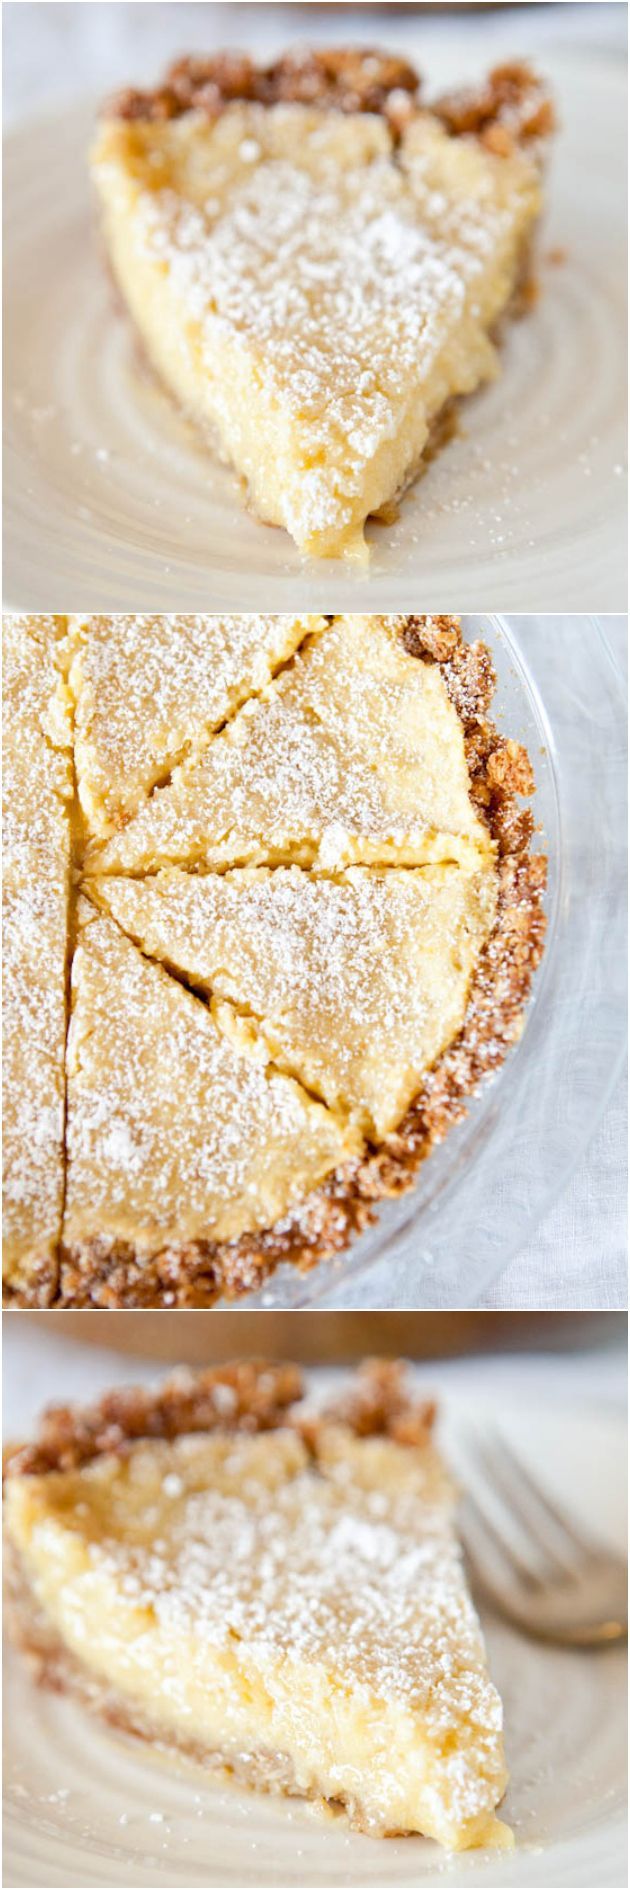 Crack Pie from the Momofoku Milkbar cookbook – Theres a reason this pie has its